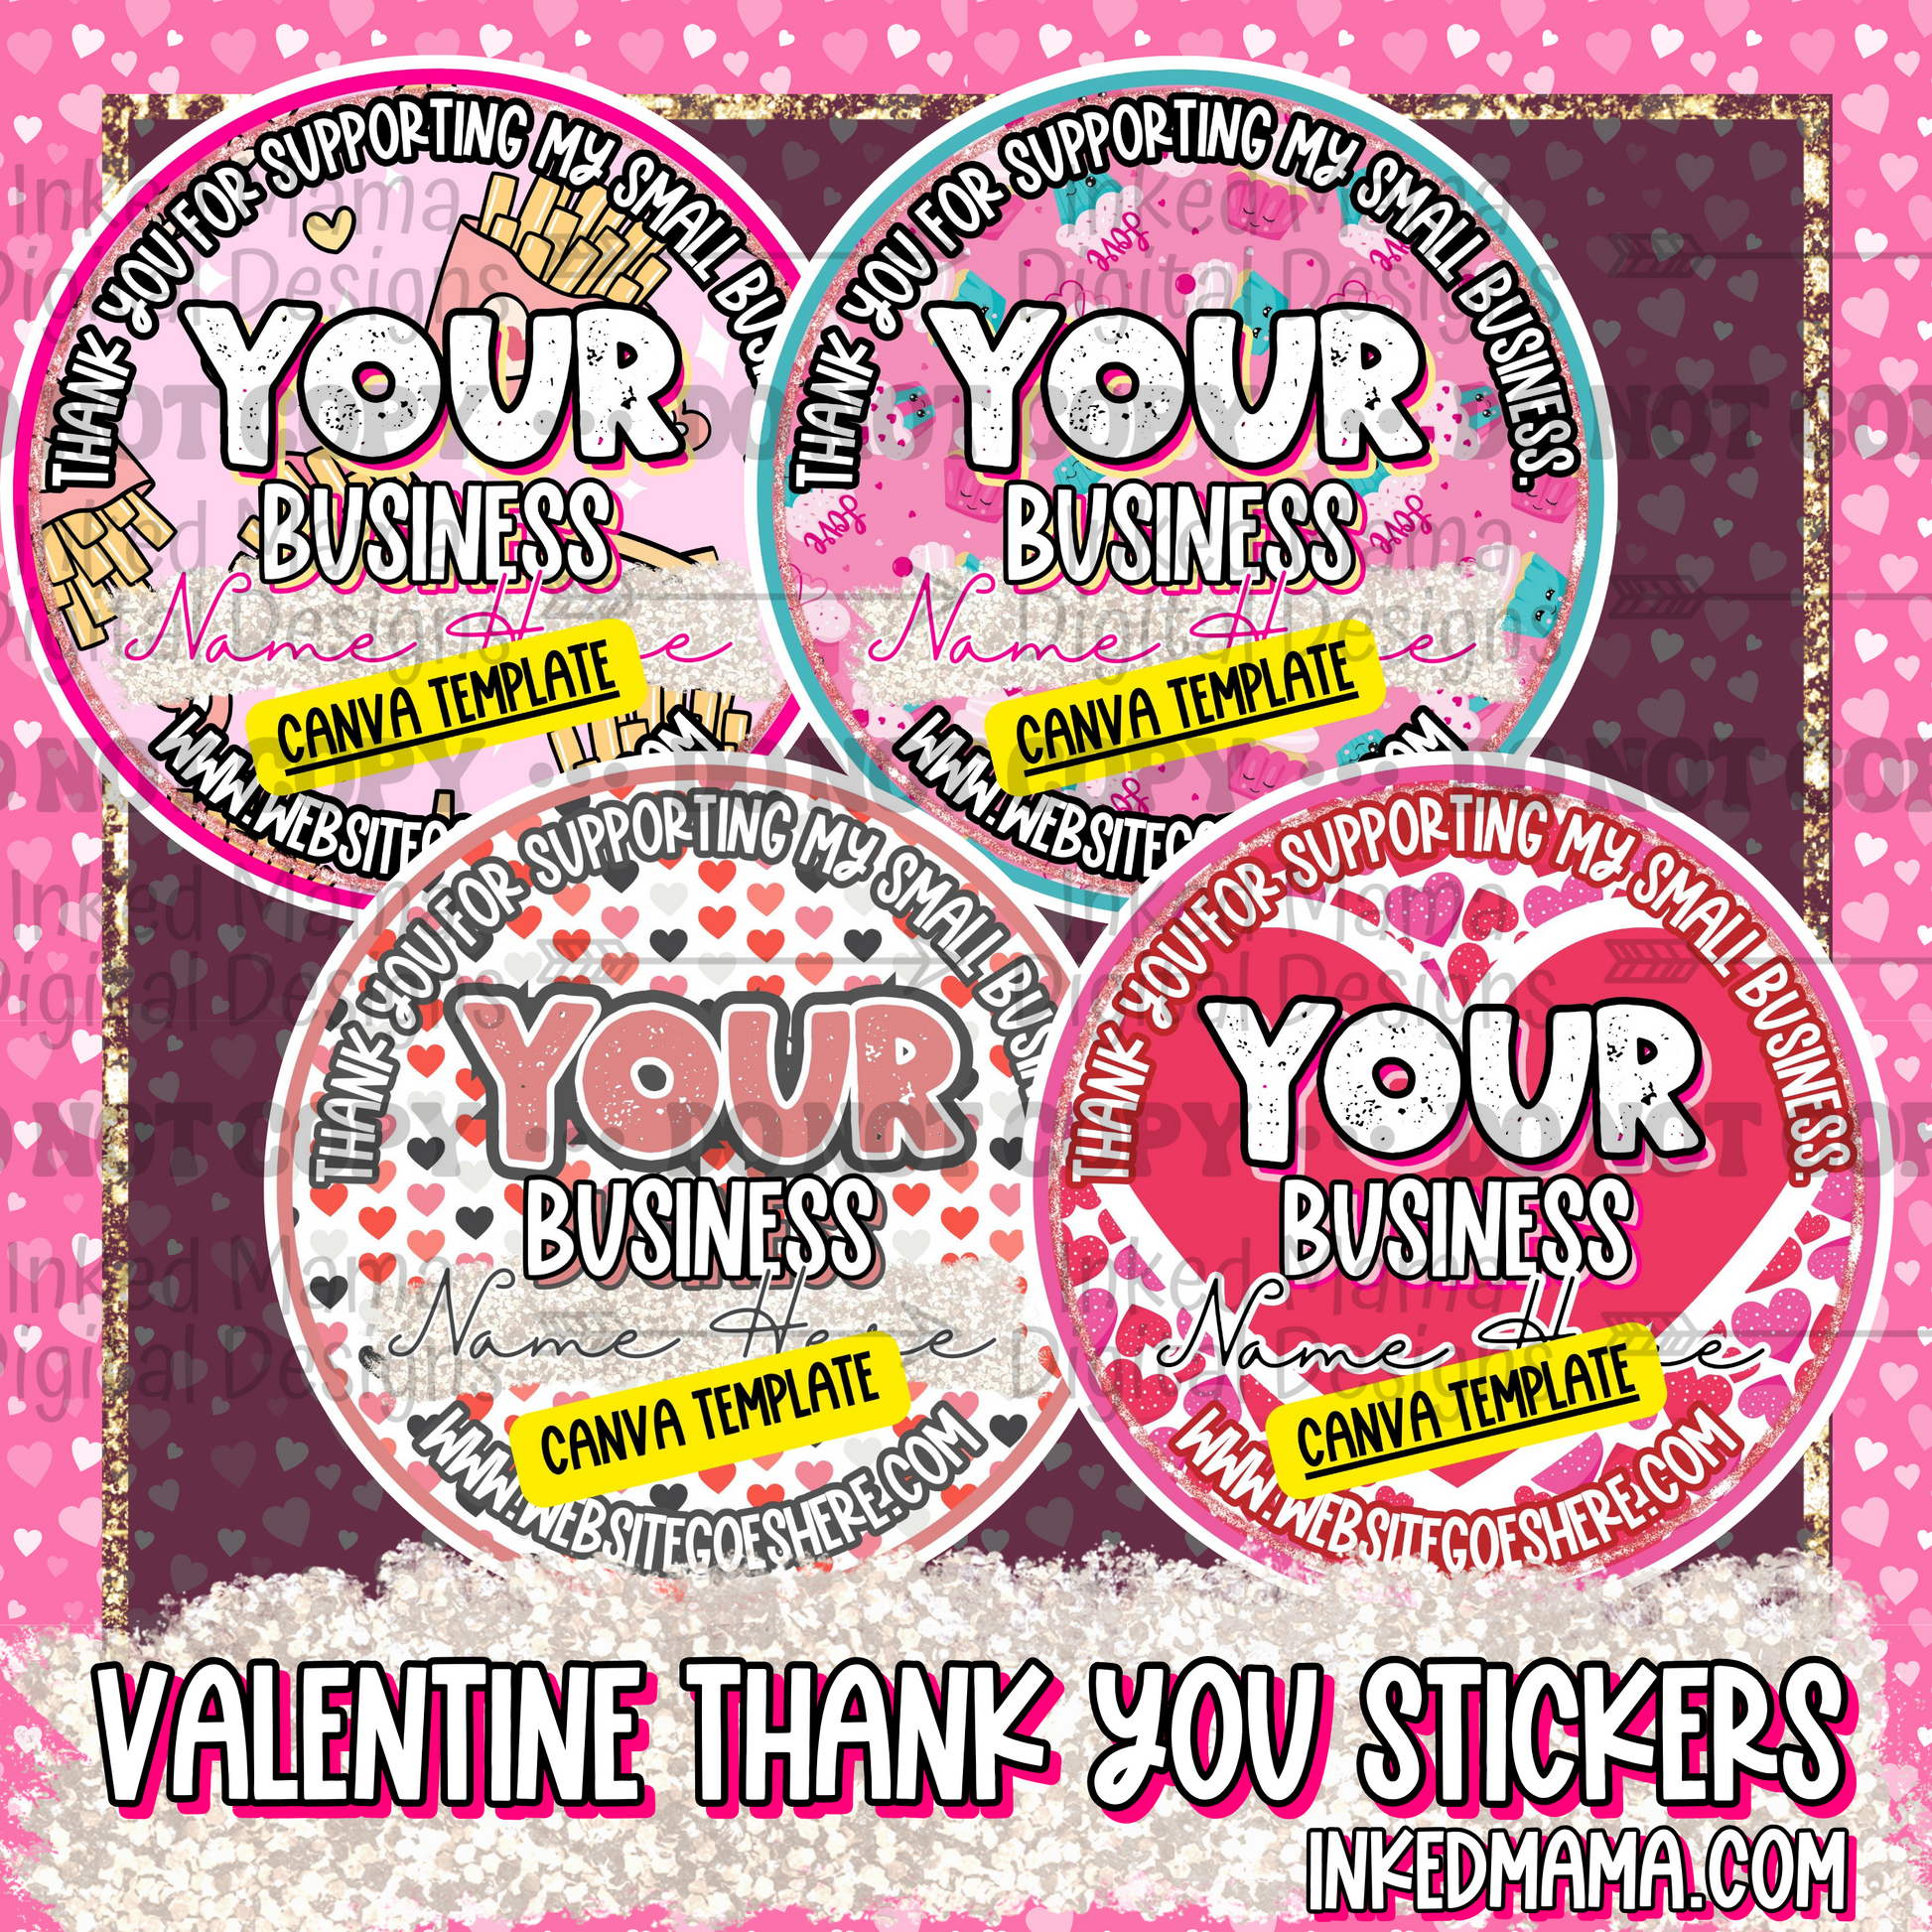 Your Name', Small Business Valentines Stickers